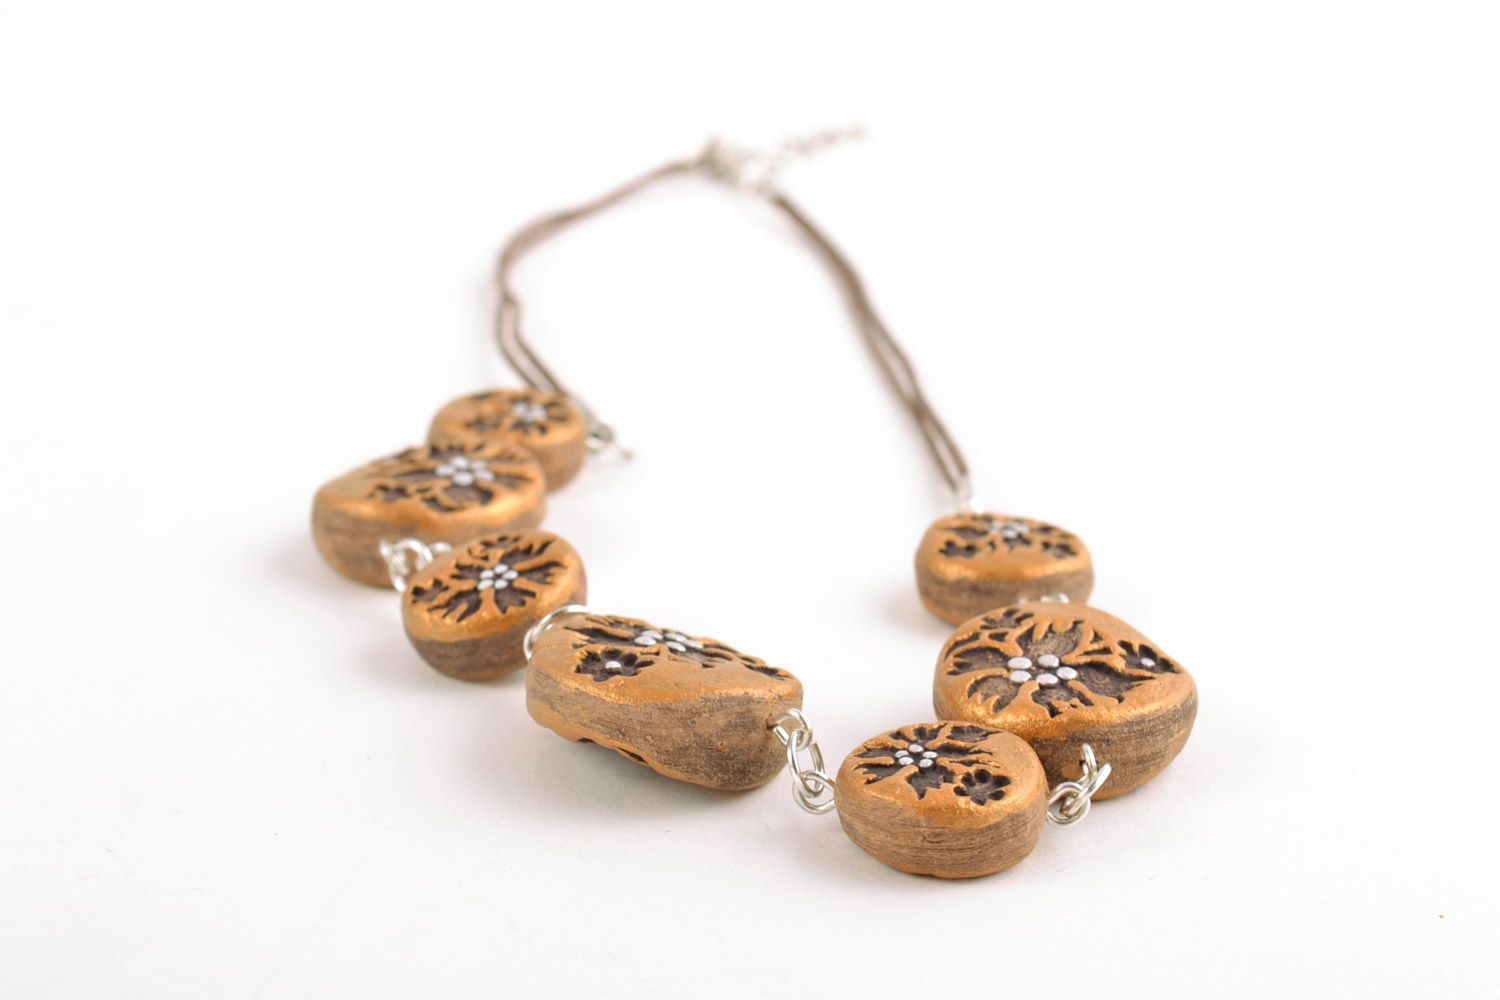 Handmade ceramic bead necklace painted with golden acrylics in ethnic style photo 5